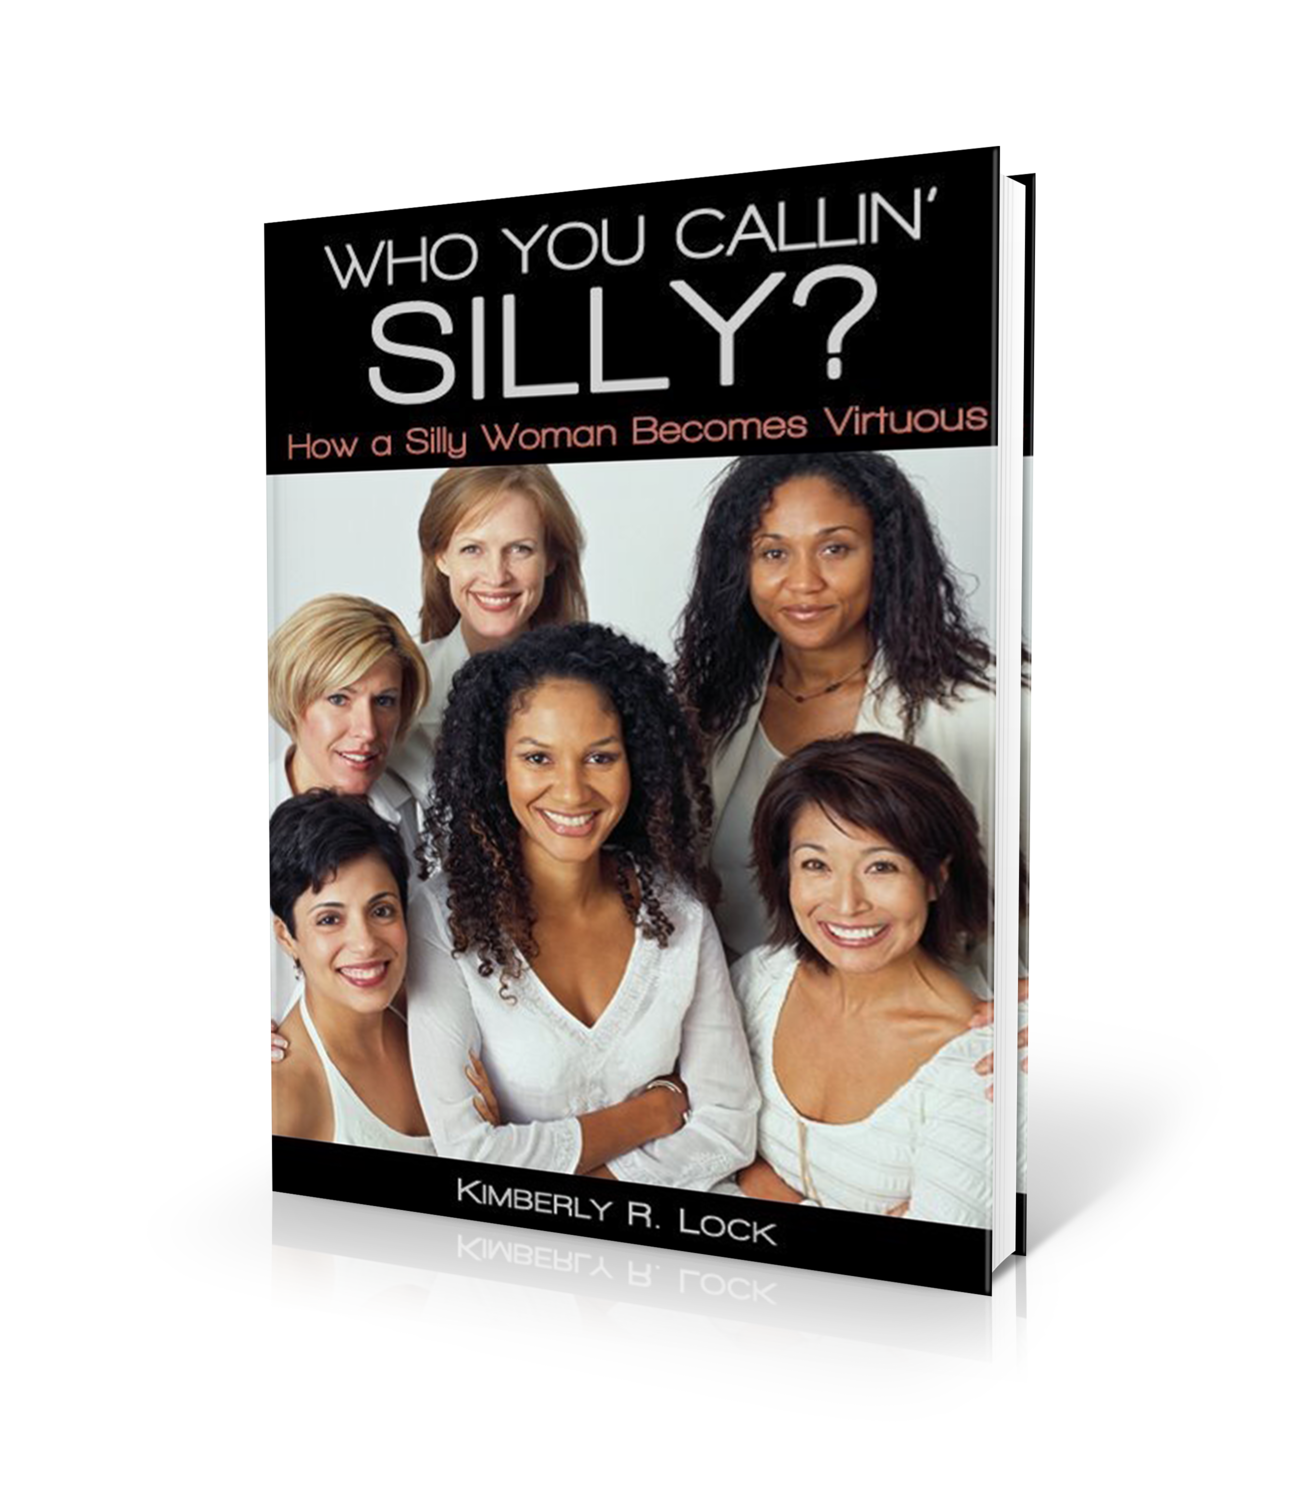 Who You Callin' Silly? How a Silly Woman Becomes Virtuous